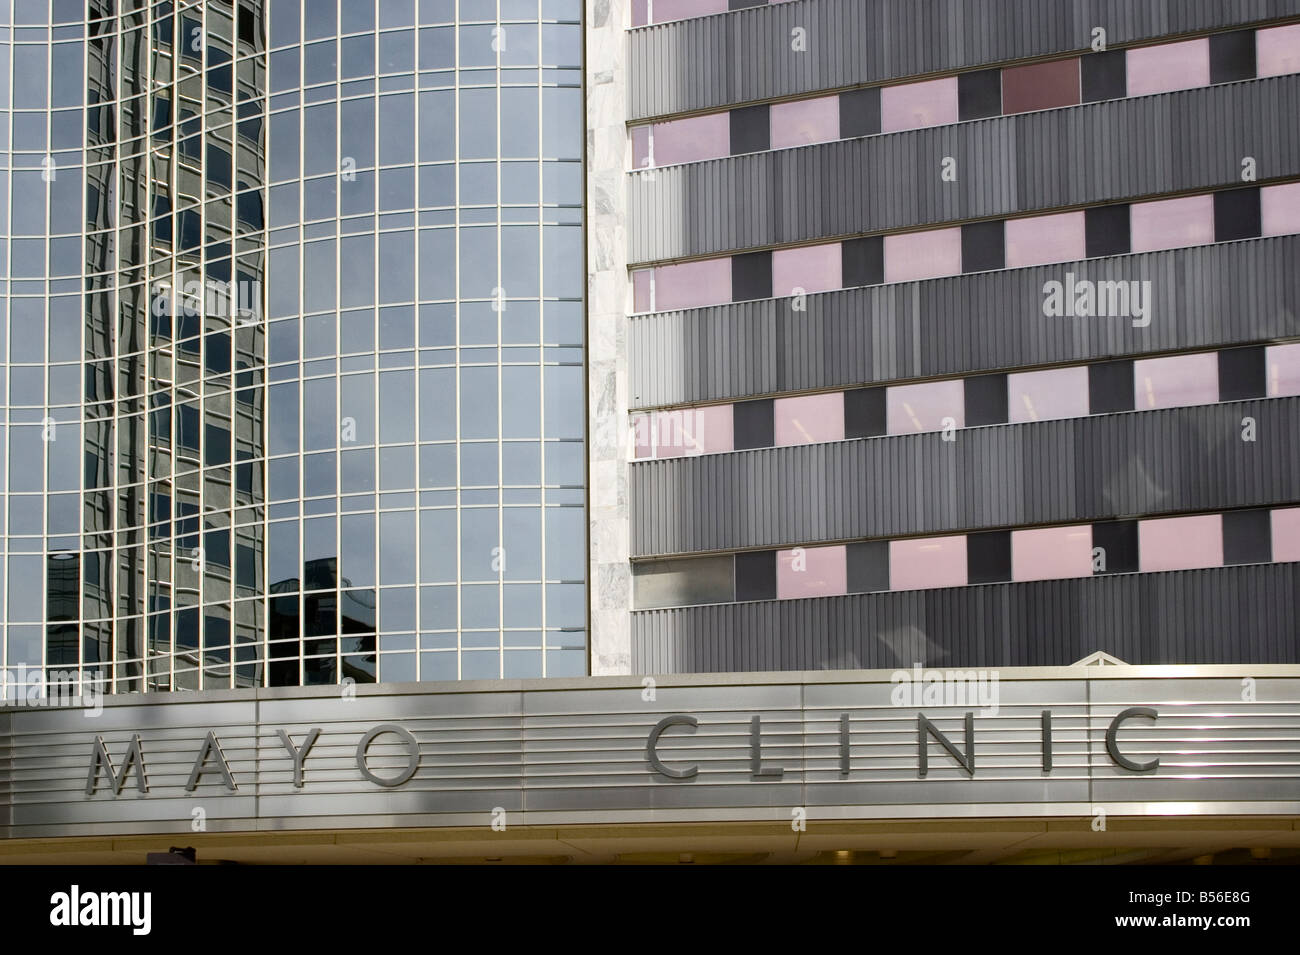 The sign above the main patient entrance to the Mayo Clinic Stock Photo